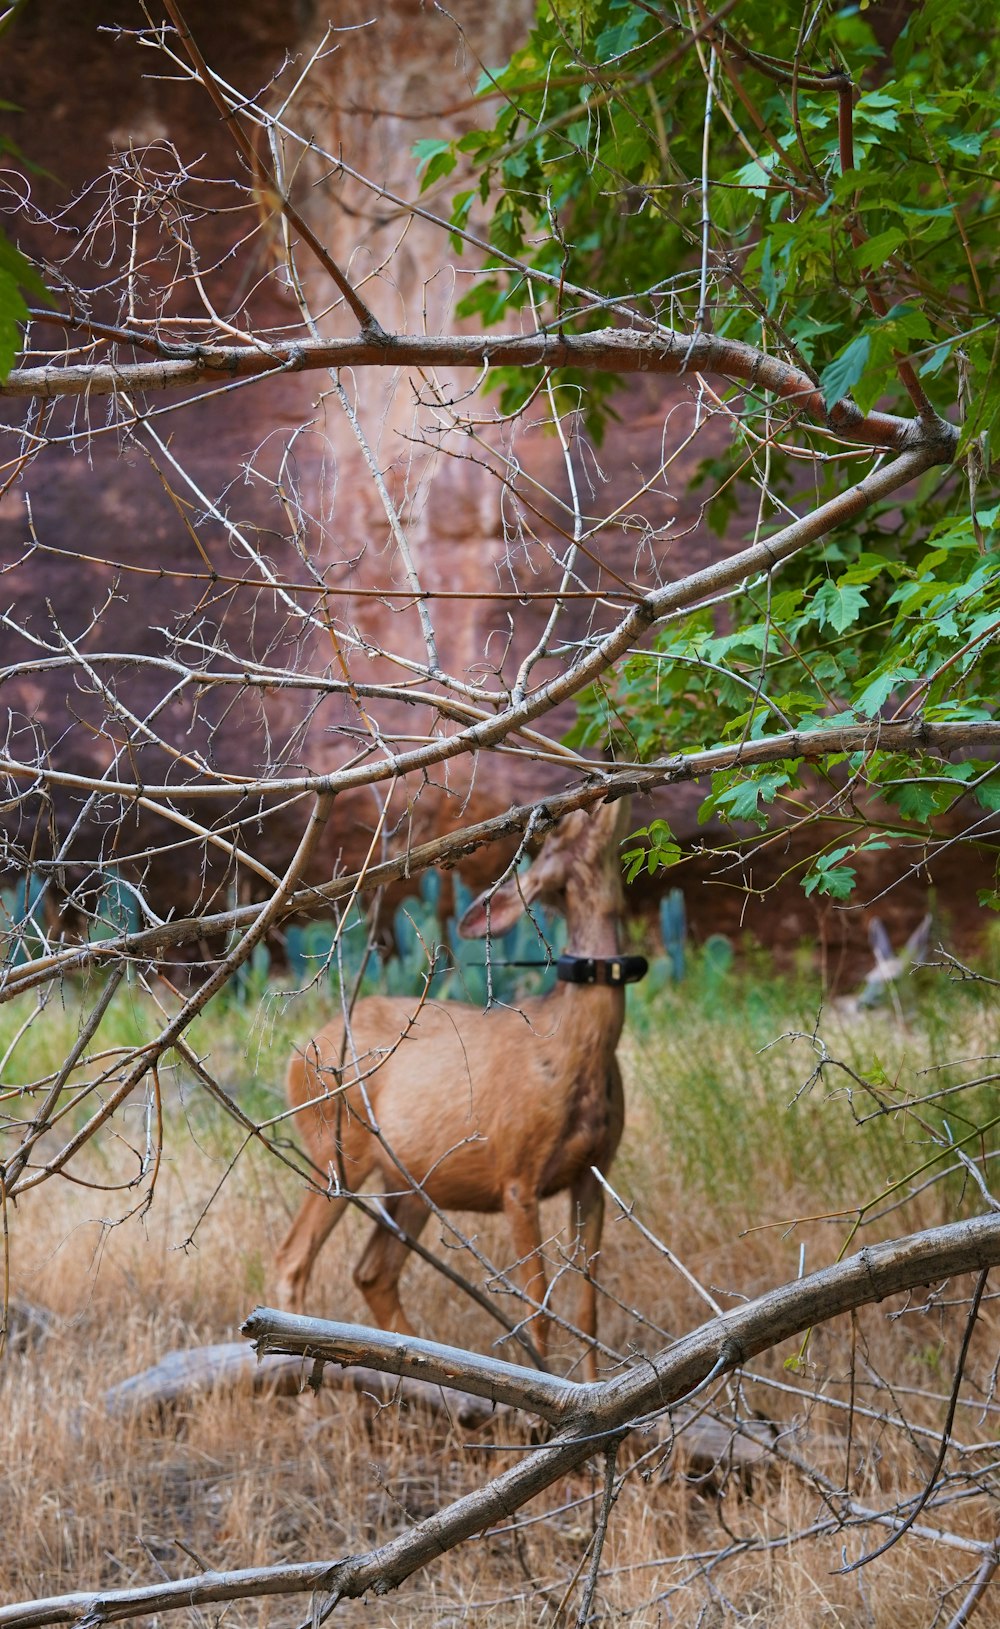 a deer in a fenced in area